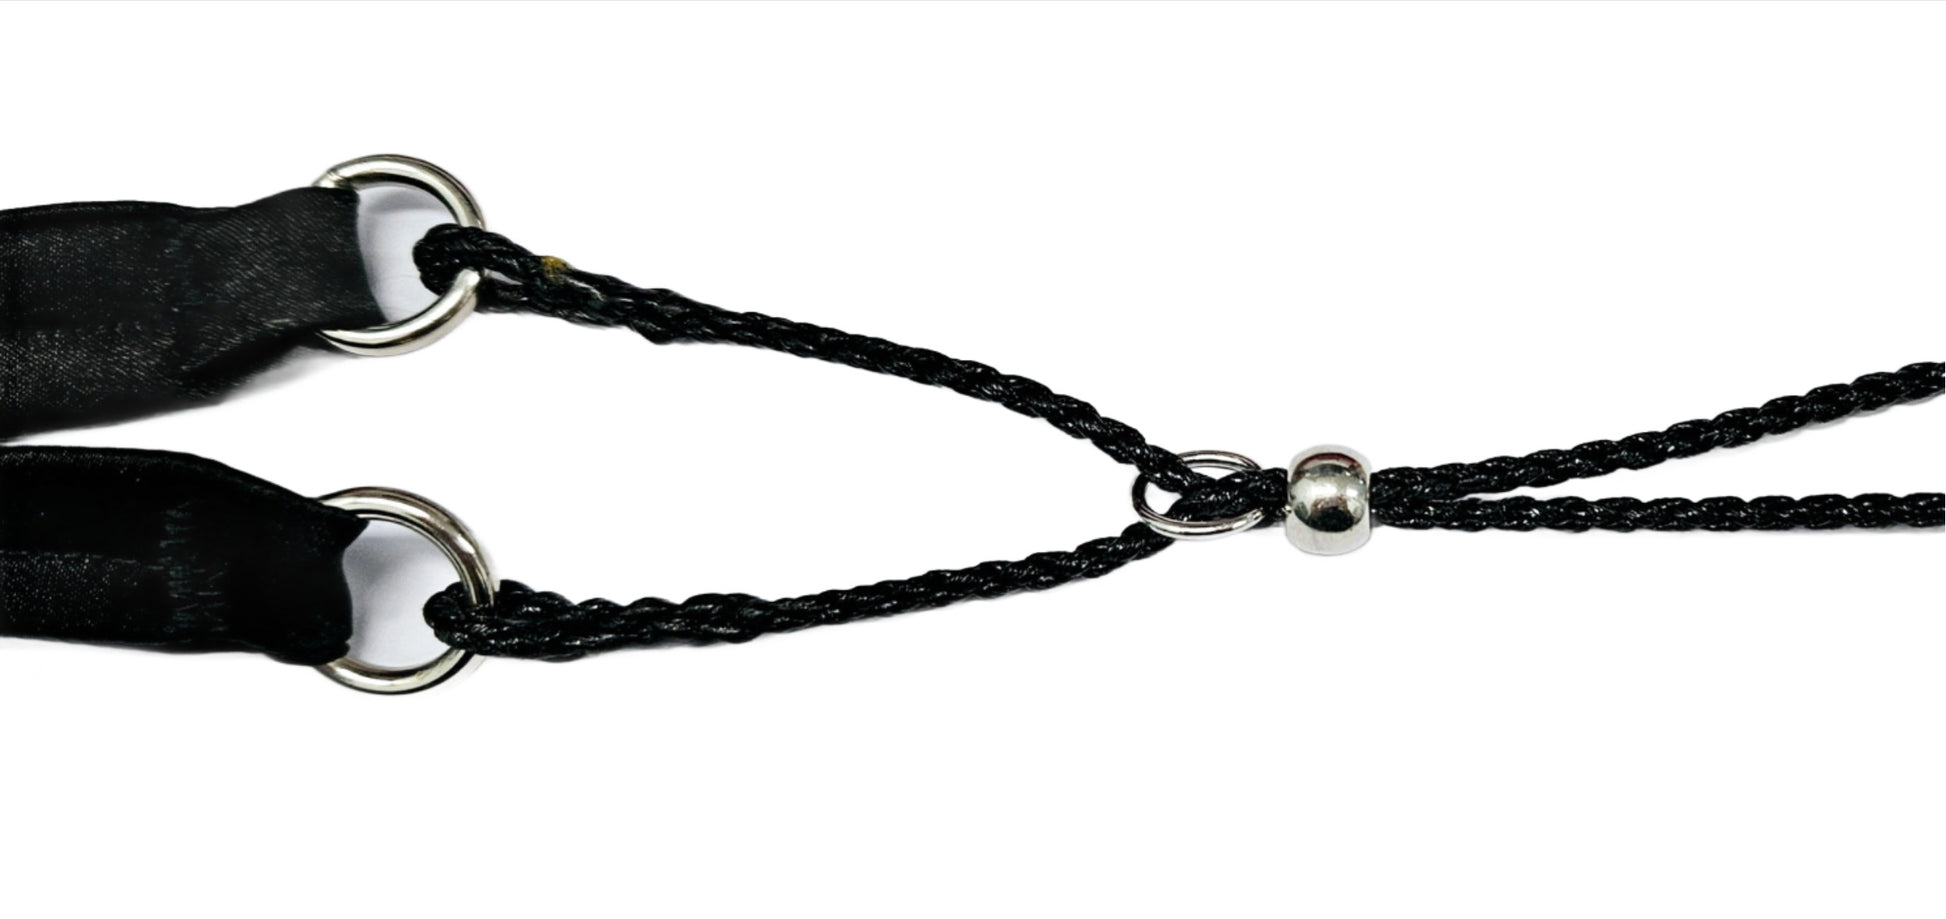 Plaited Leather Lead with Satin Neck & Bling